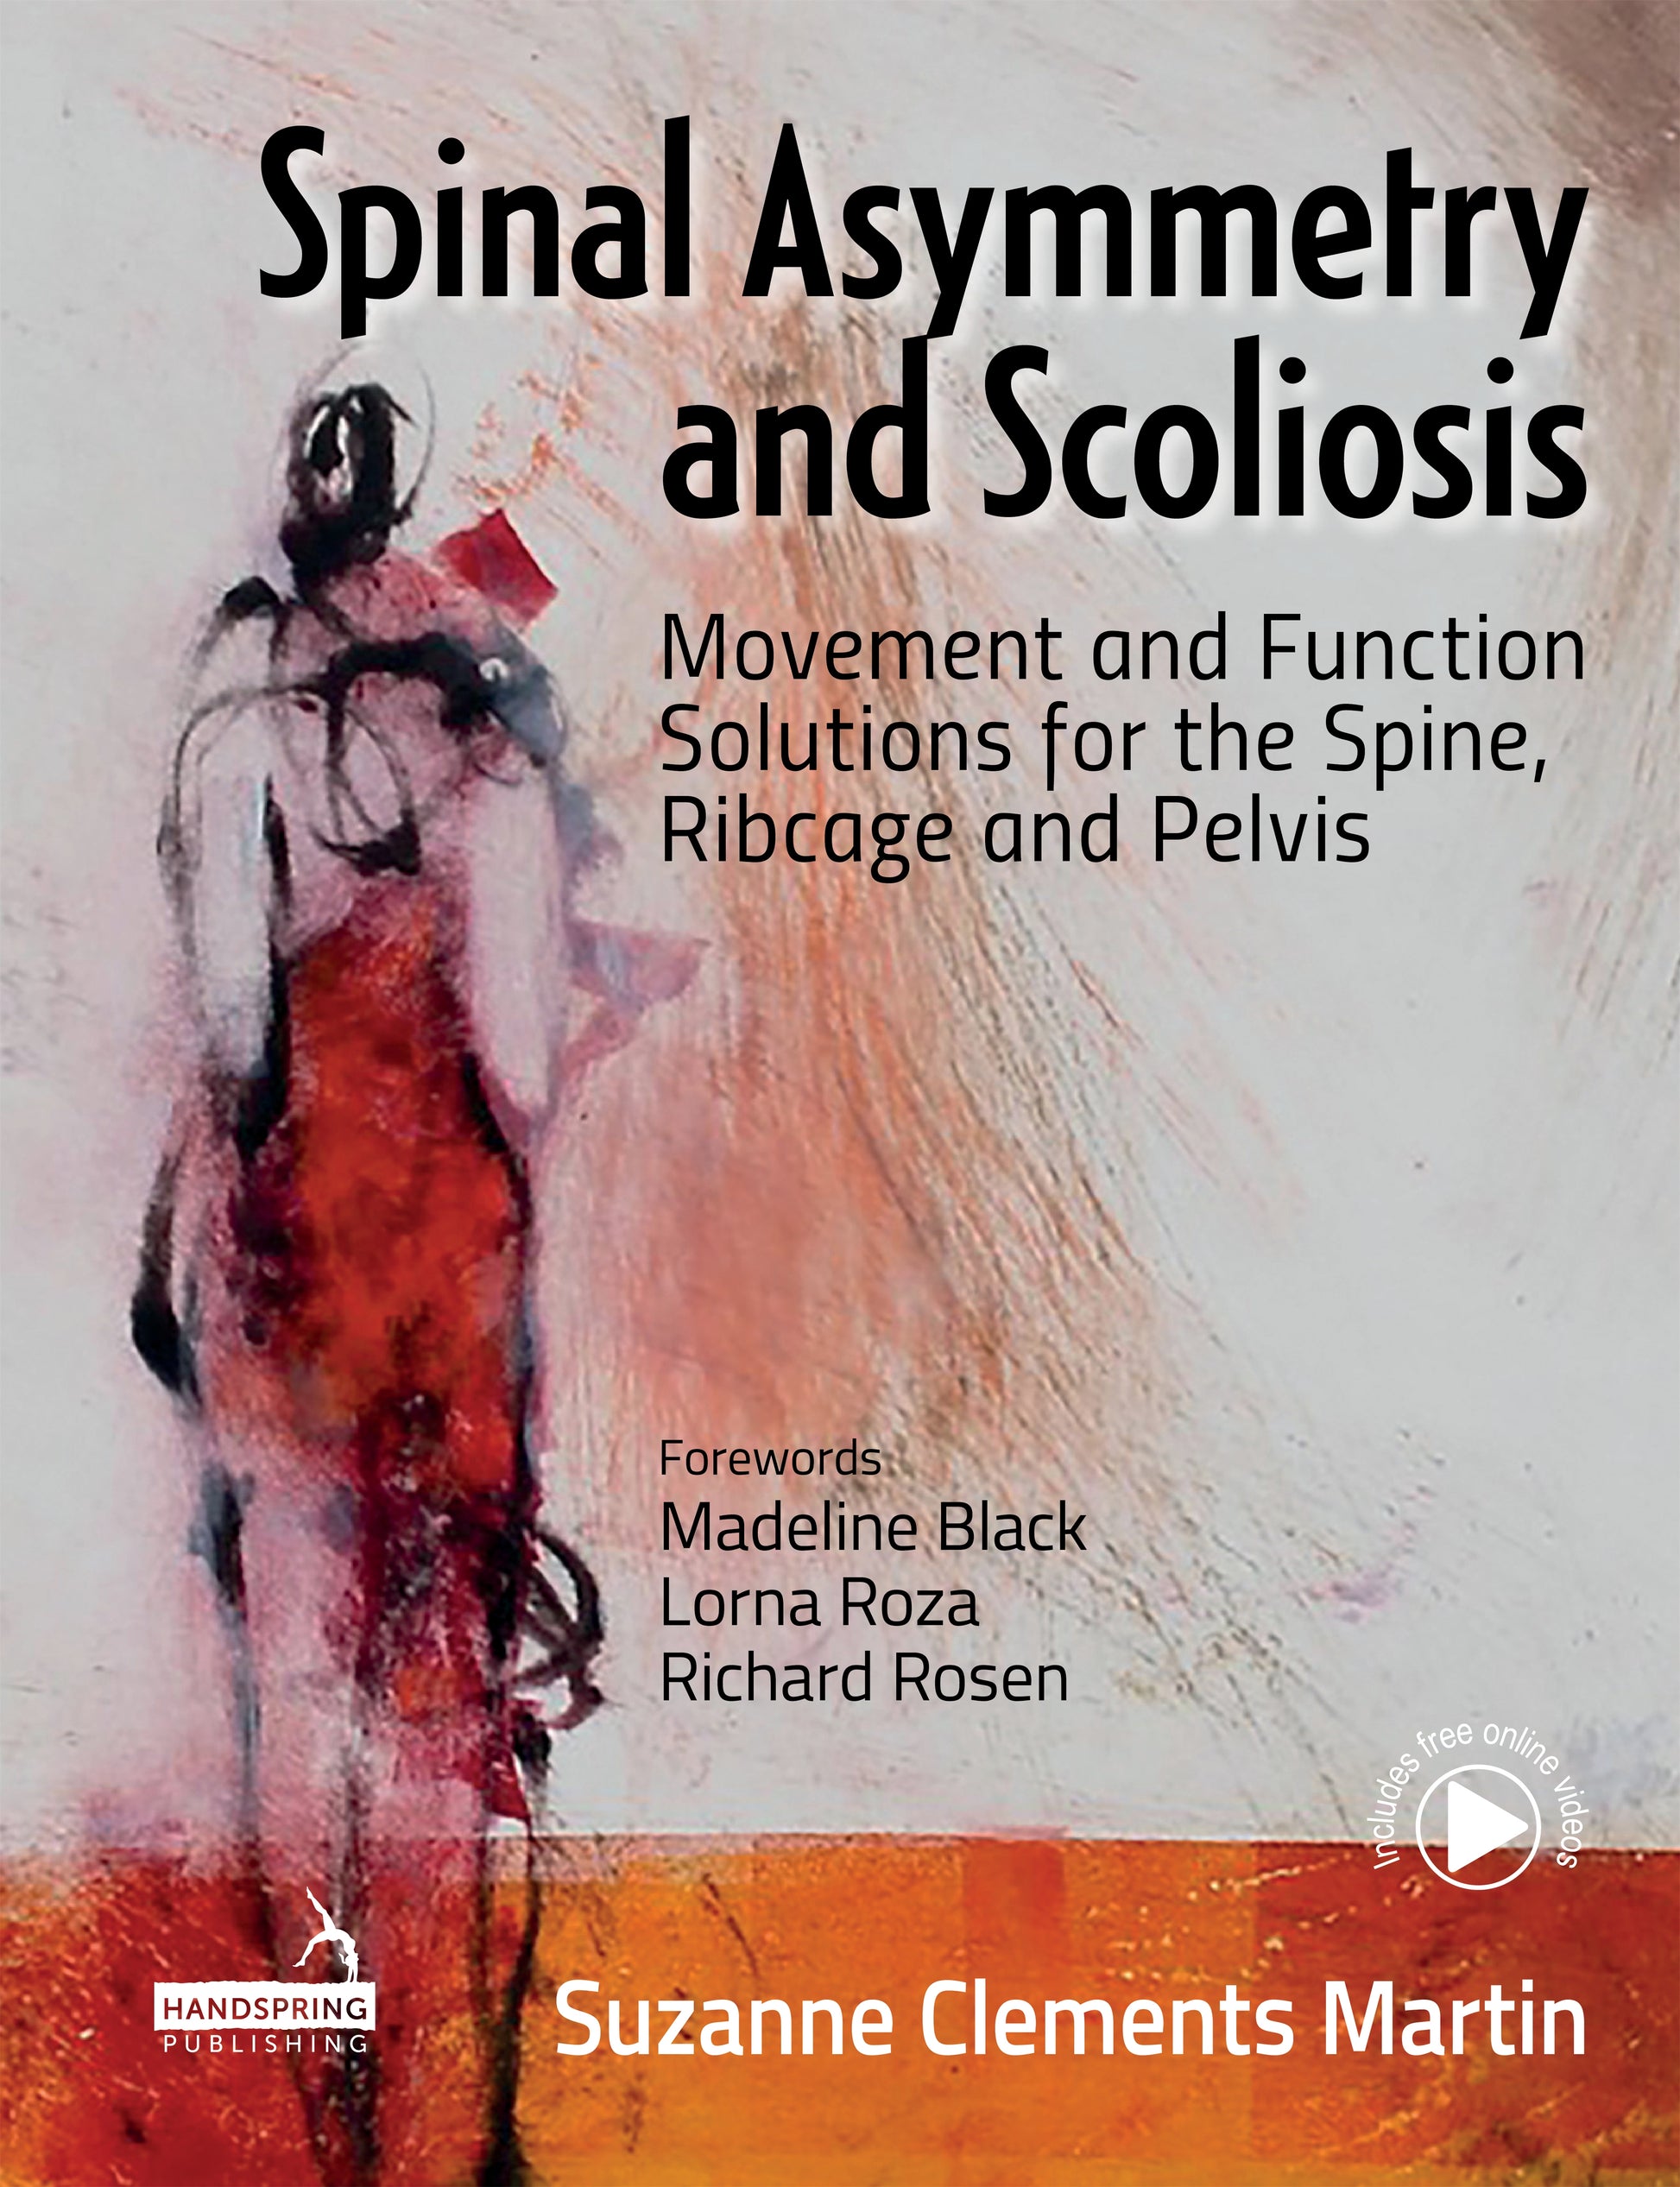 Spinal Asymmetry and Scoliosis by Suzanne Clements Martin